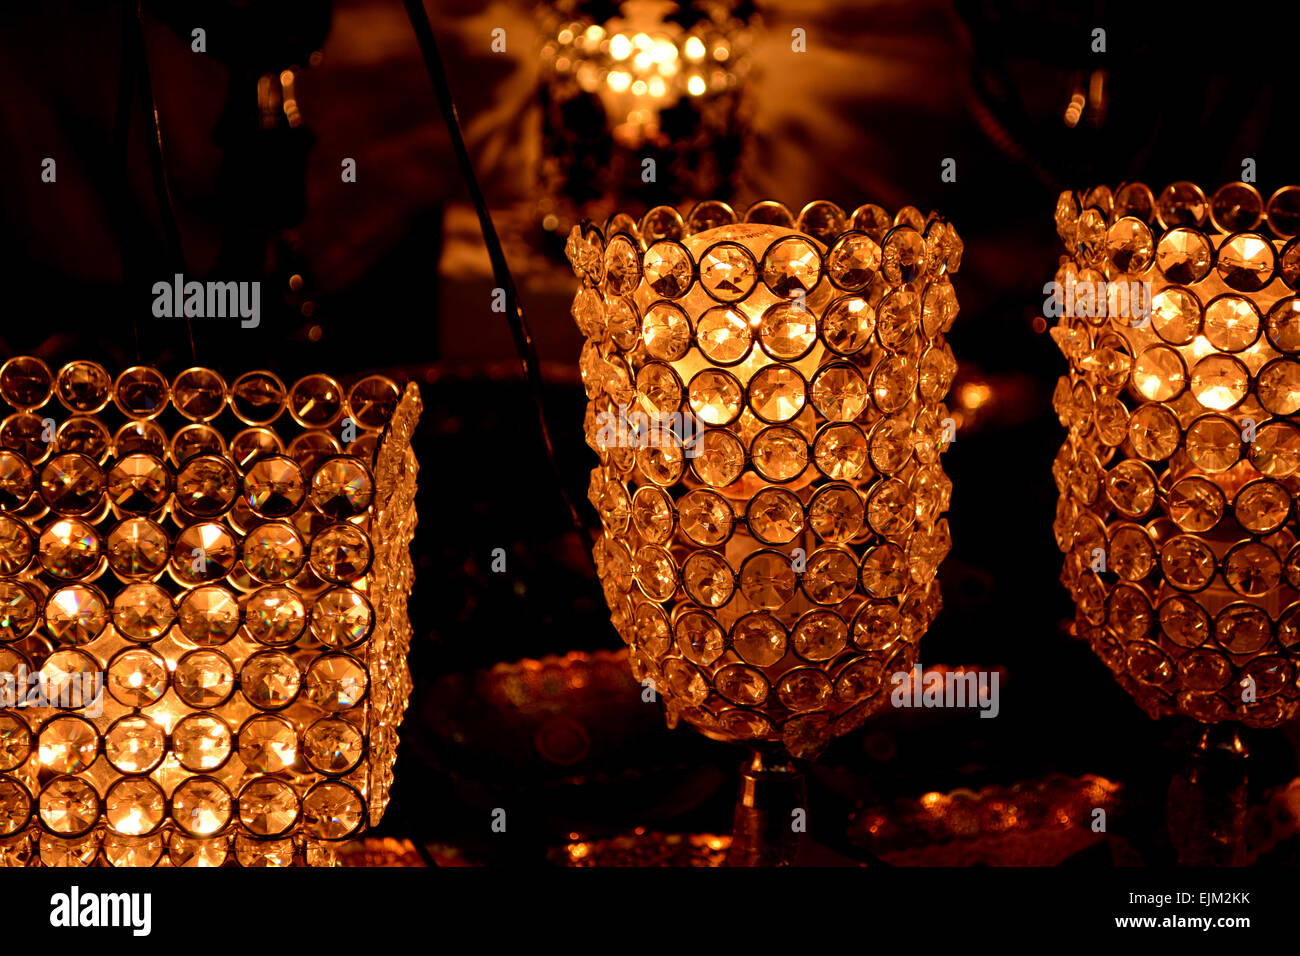 Crystal decoration lamps in dark background Stock Photo